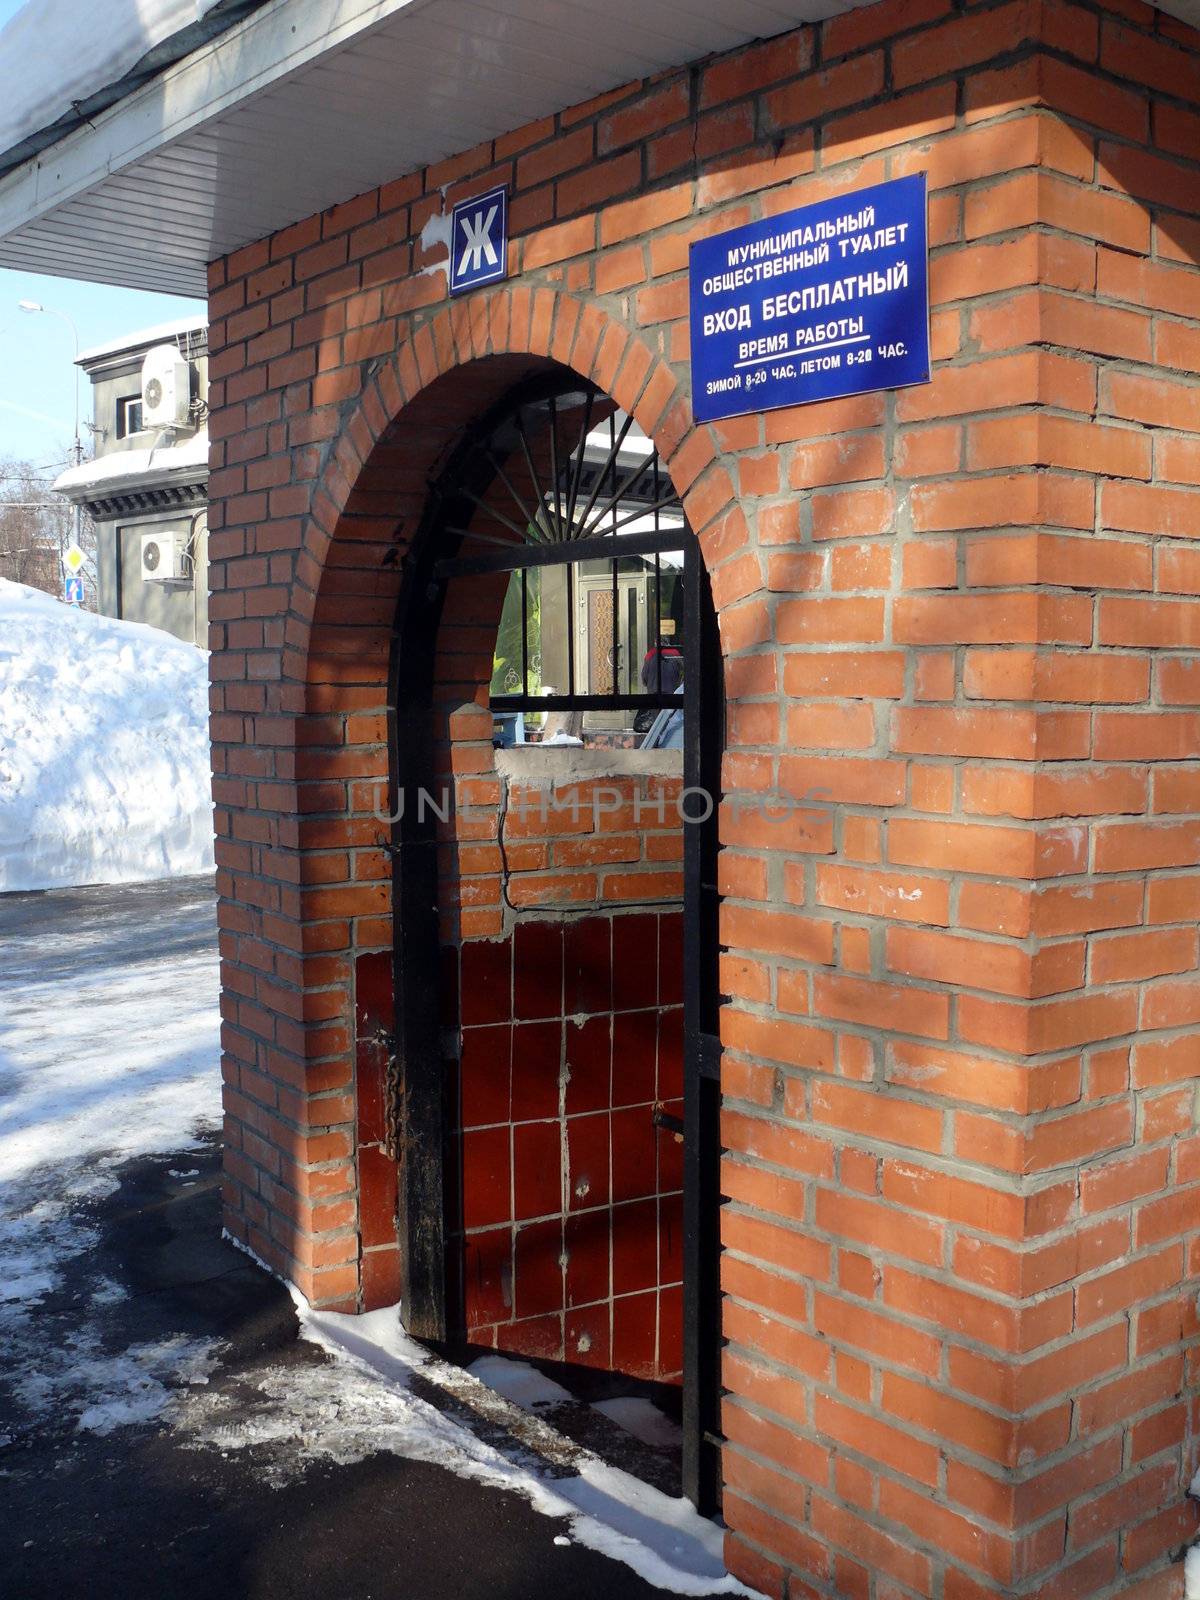 Entrance of free public toilet in the street of Moscow by Stoyanov